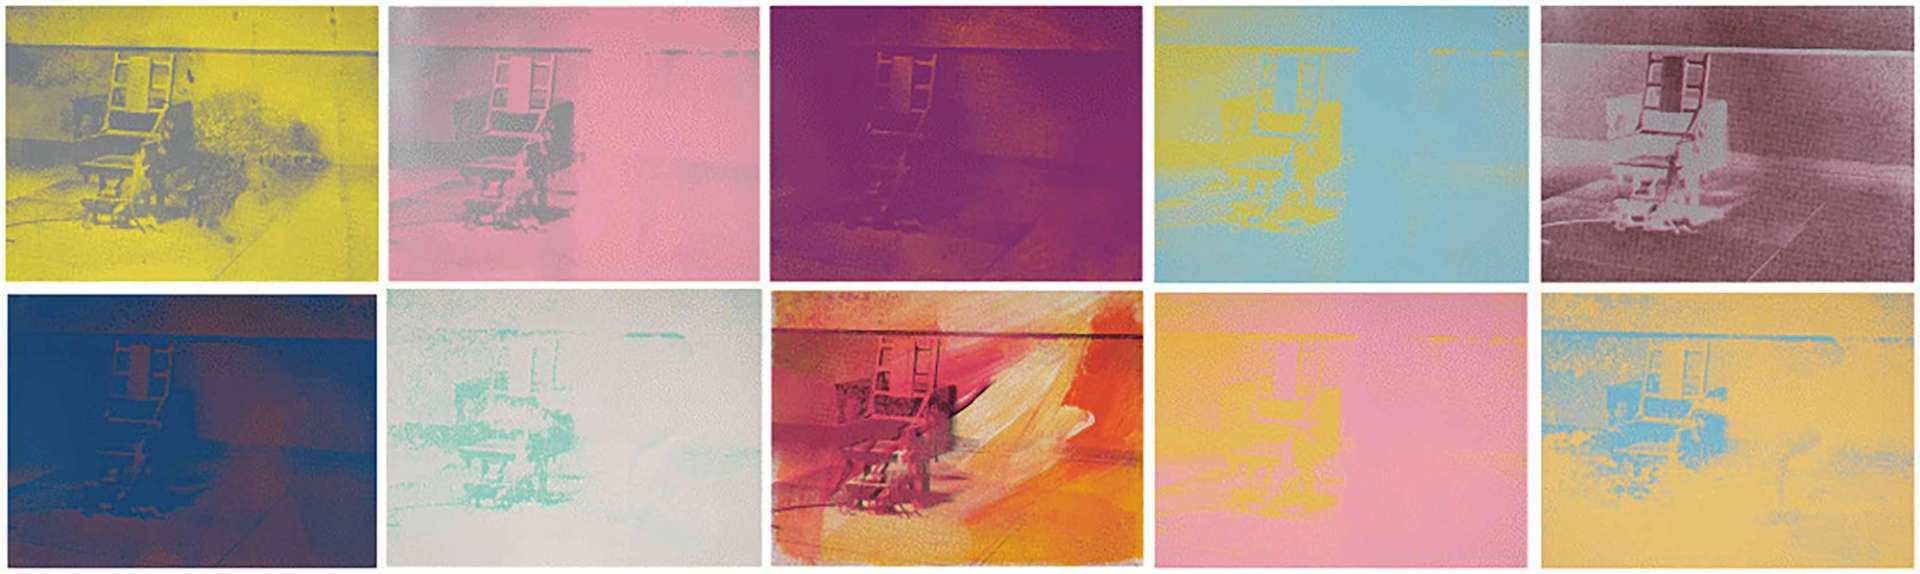 Electric Chair (complete set) - Signed Print by Andy Warhol 1971 - MyArtBroker